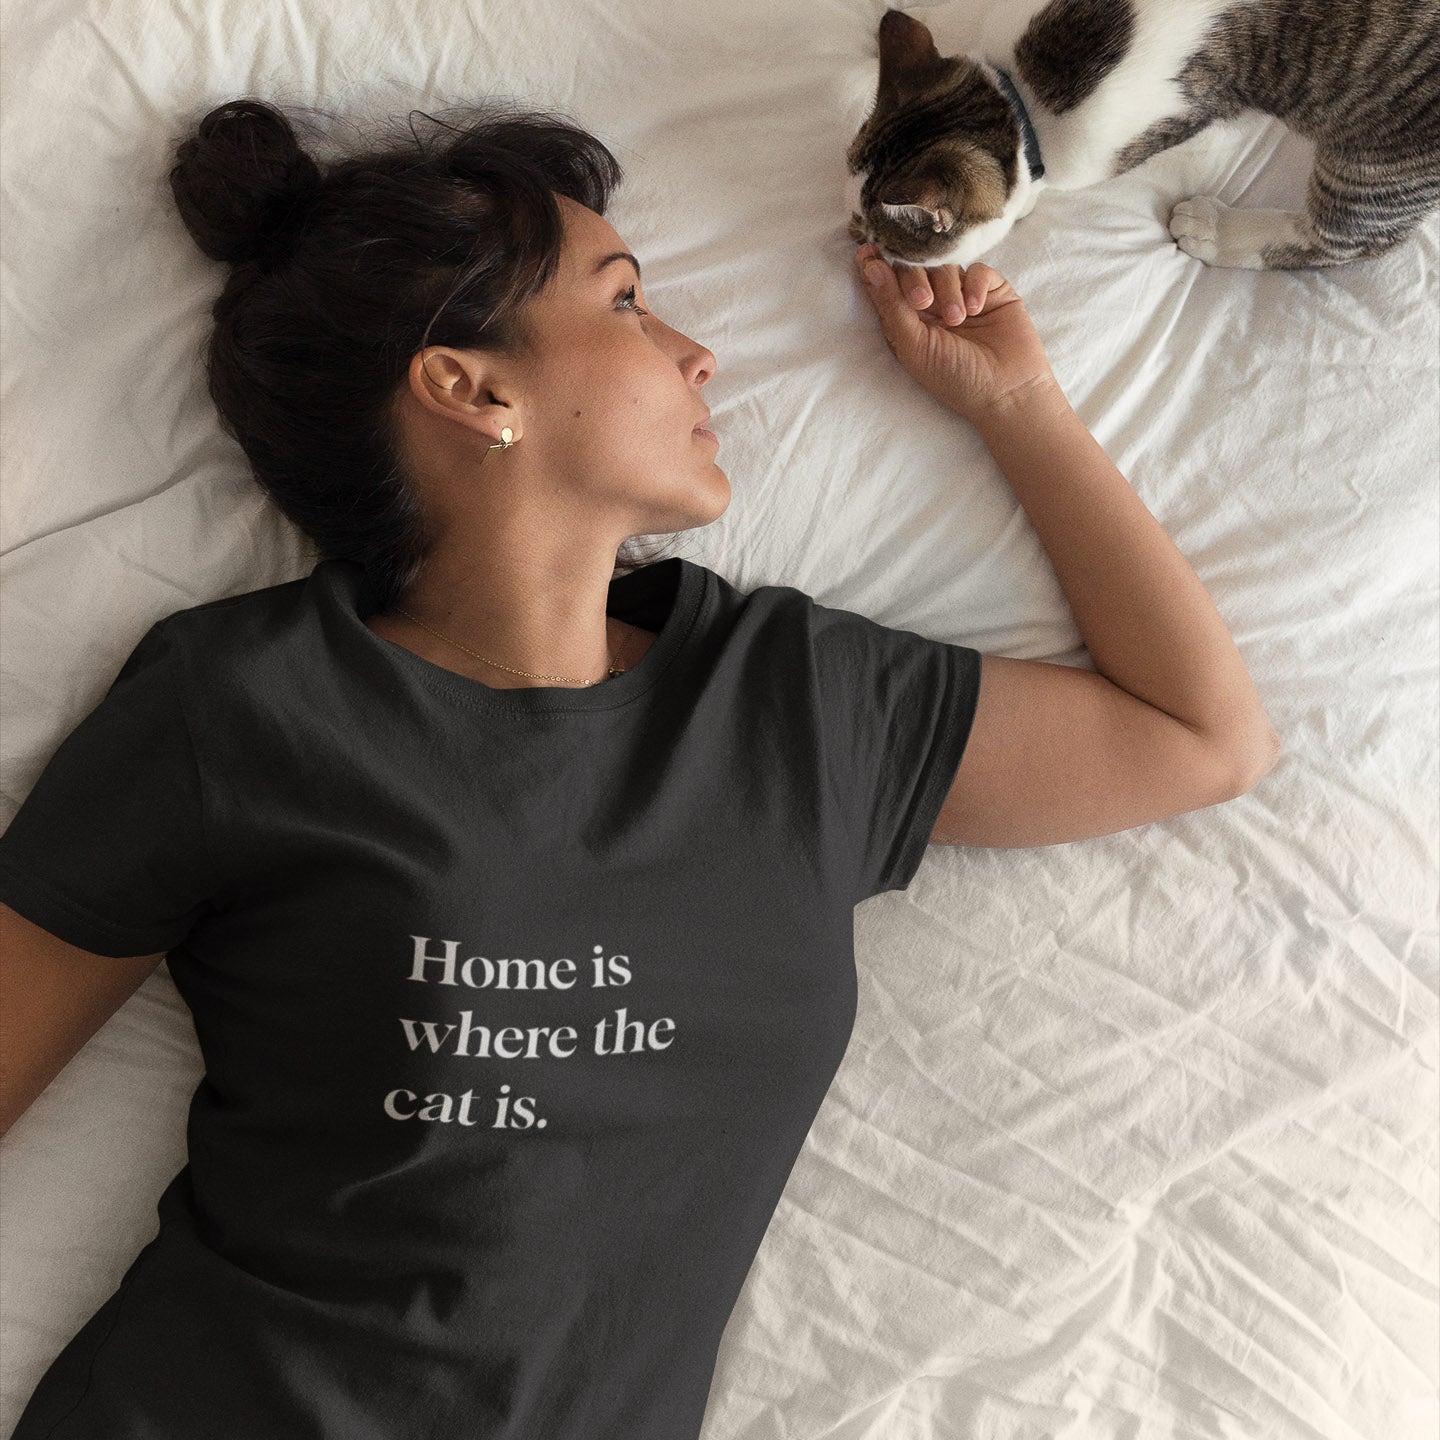 Home is where the cat is shirt black